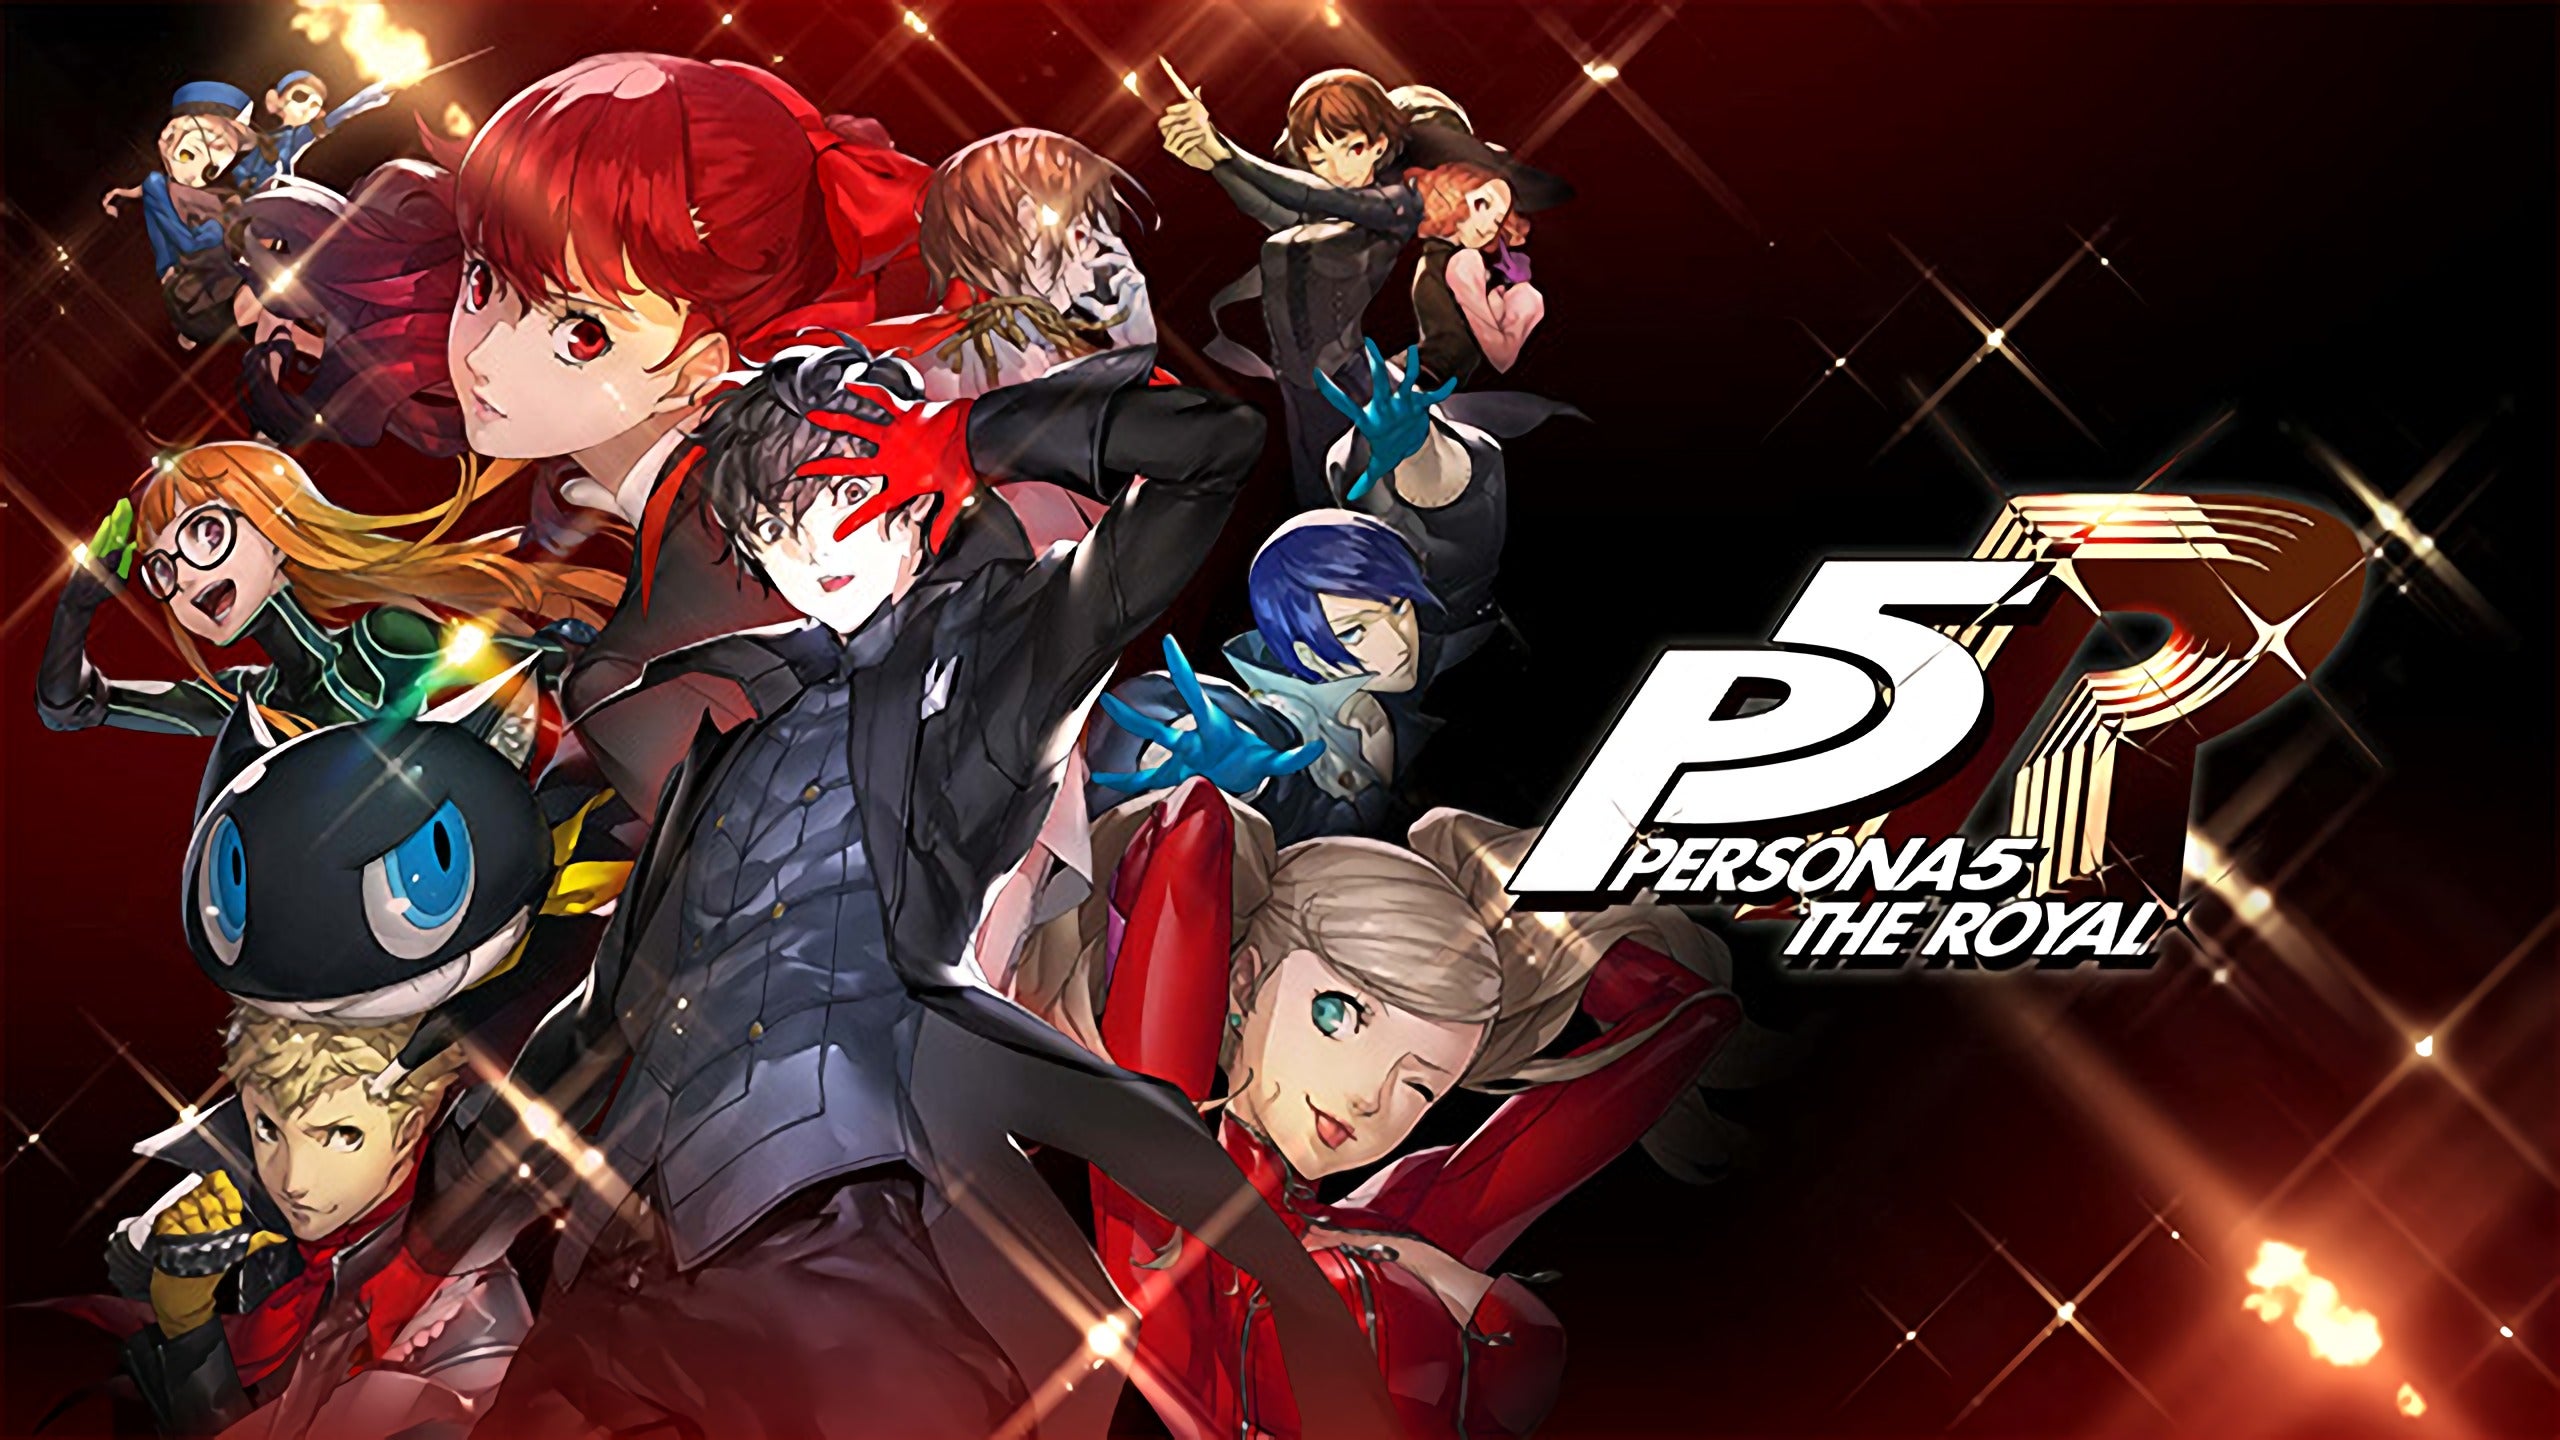 To celebrate the release of P5R (and the gameplay reveal of P5S), I decided to enhance the P5R banner art into a 2k Wallpaper